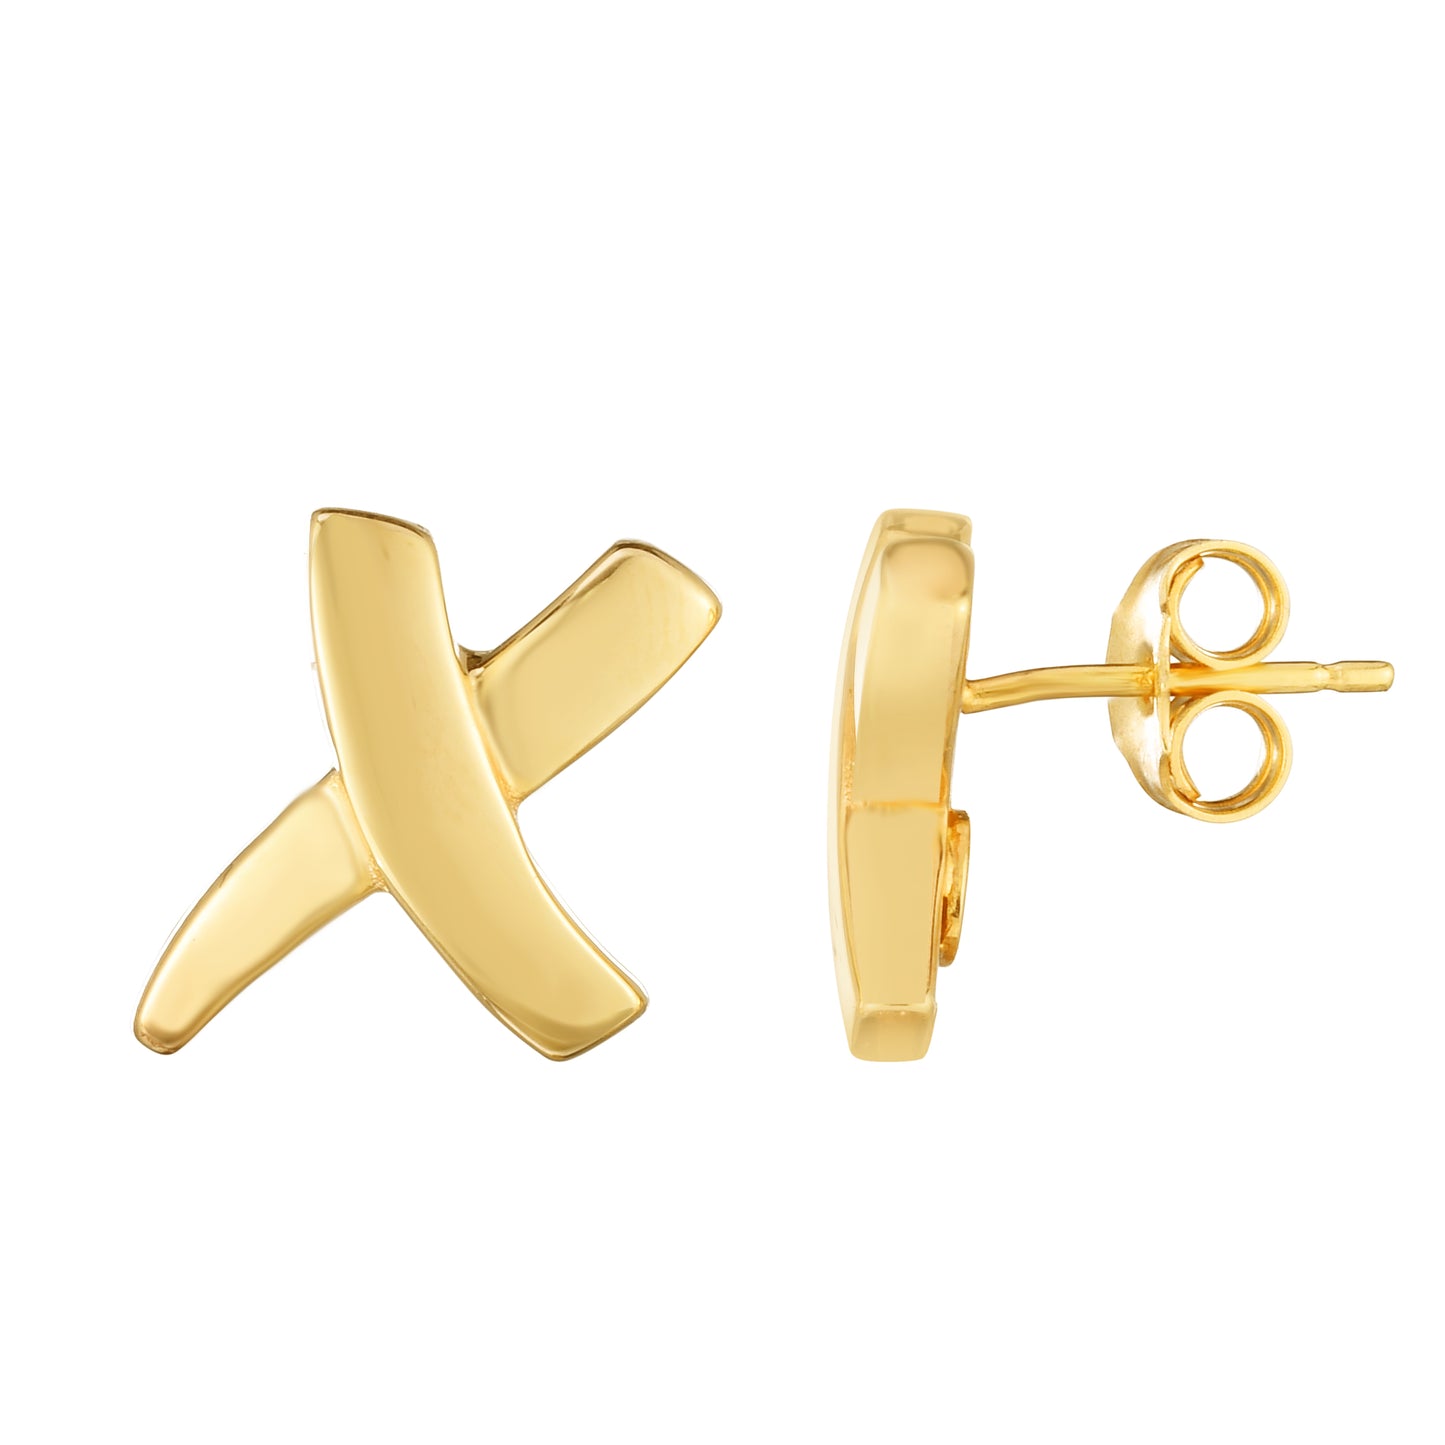 14K Gold Sculpted X Earrings with Push Back Clasp.